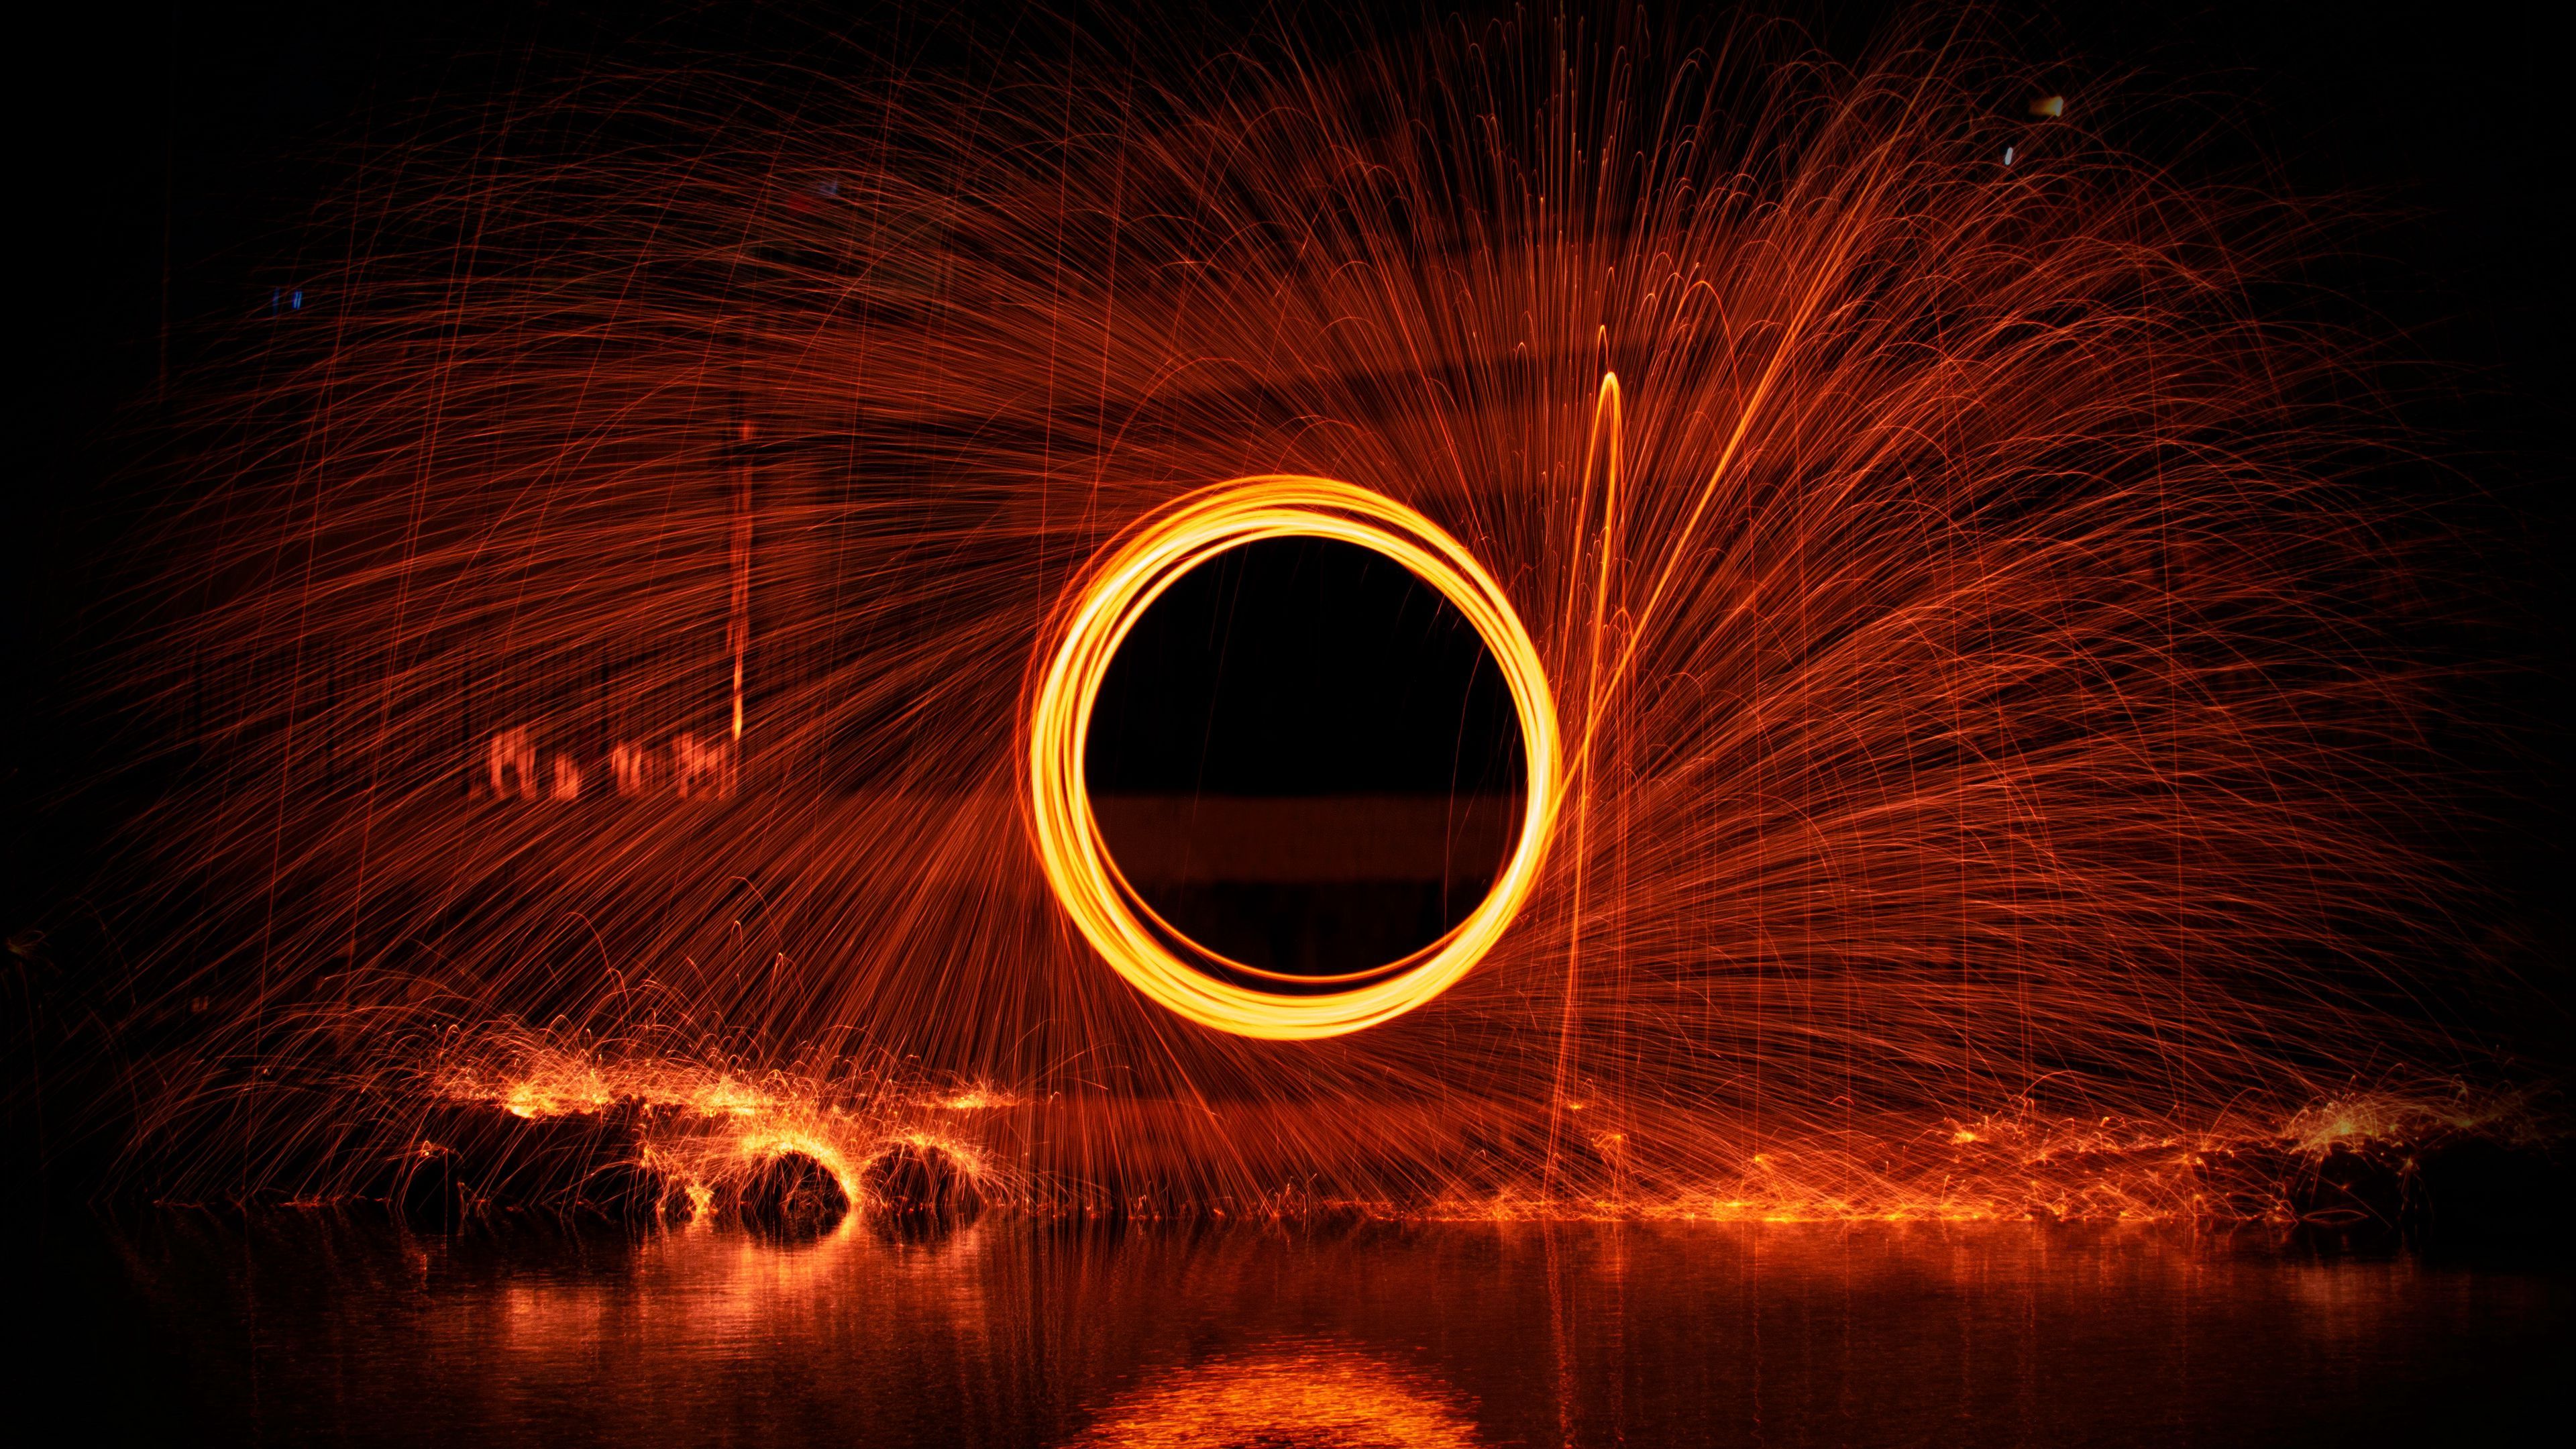 Download wallpaper 3840x2160 circle, movement, sparks, glow 4k uhd 16:9 HD background